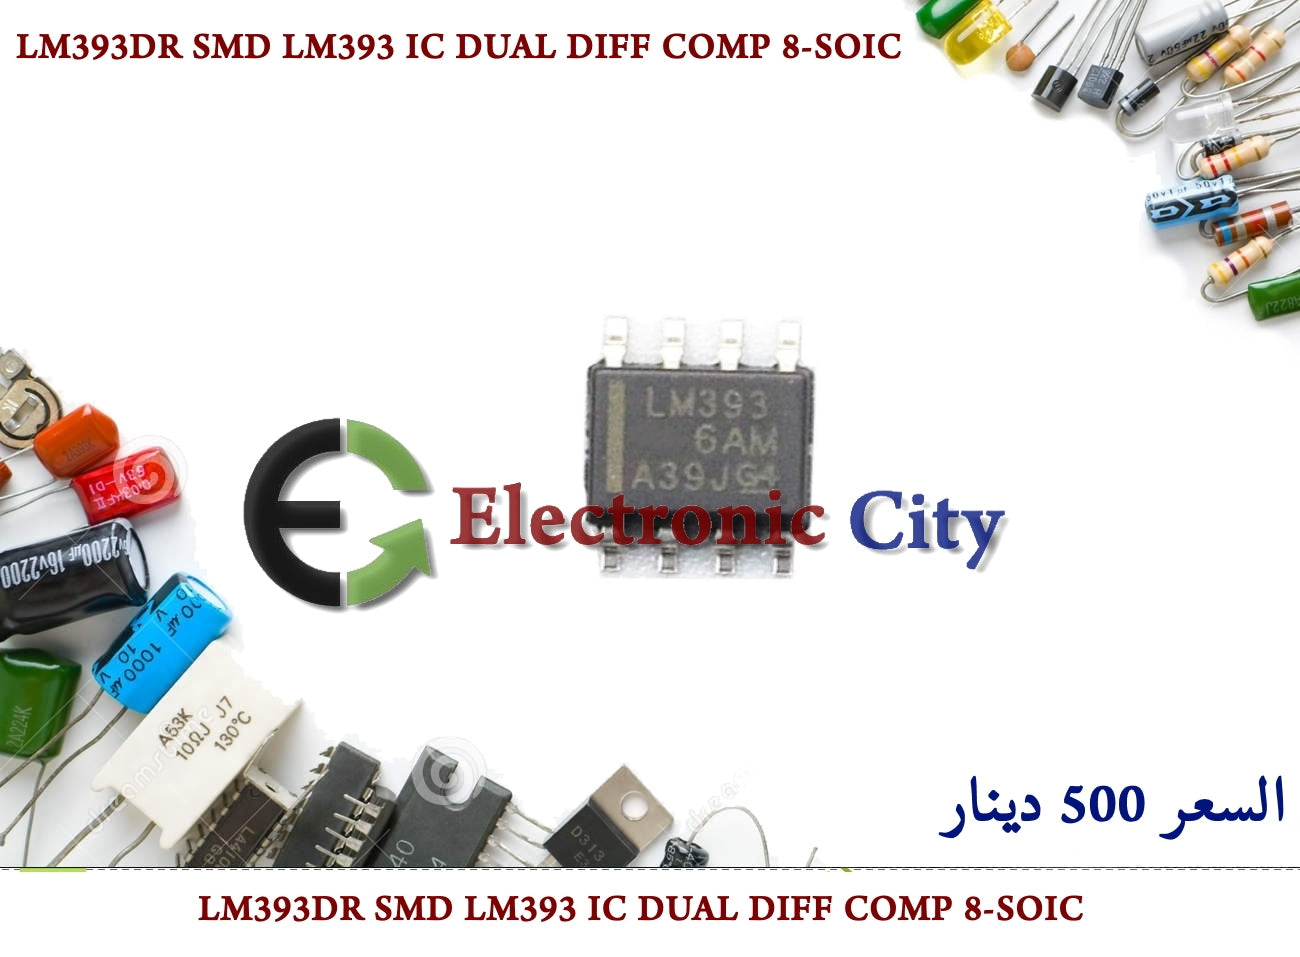 LM393DR SMD LM393 IC DUAL DIFF COMP 8-SOIC